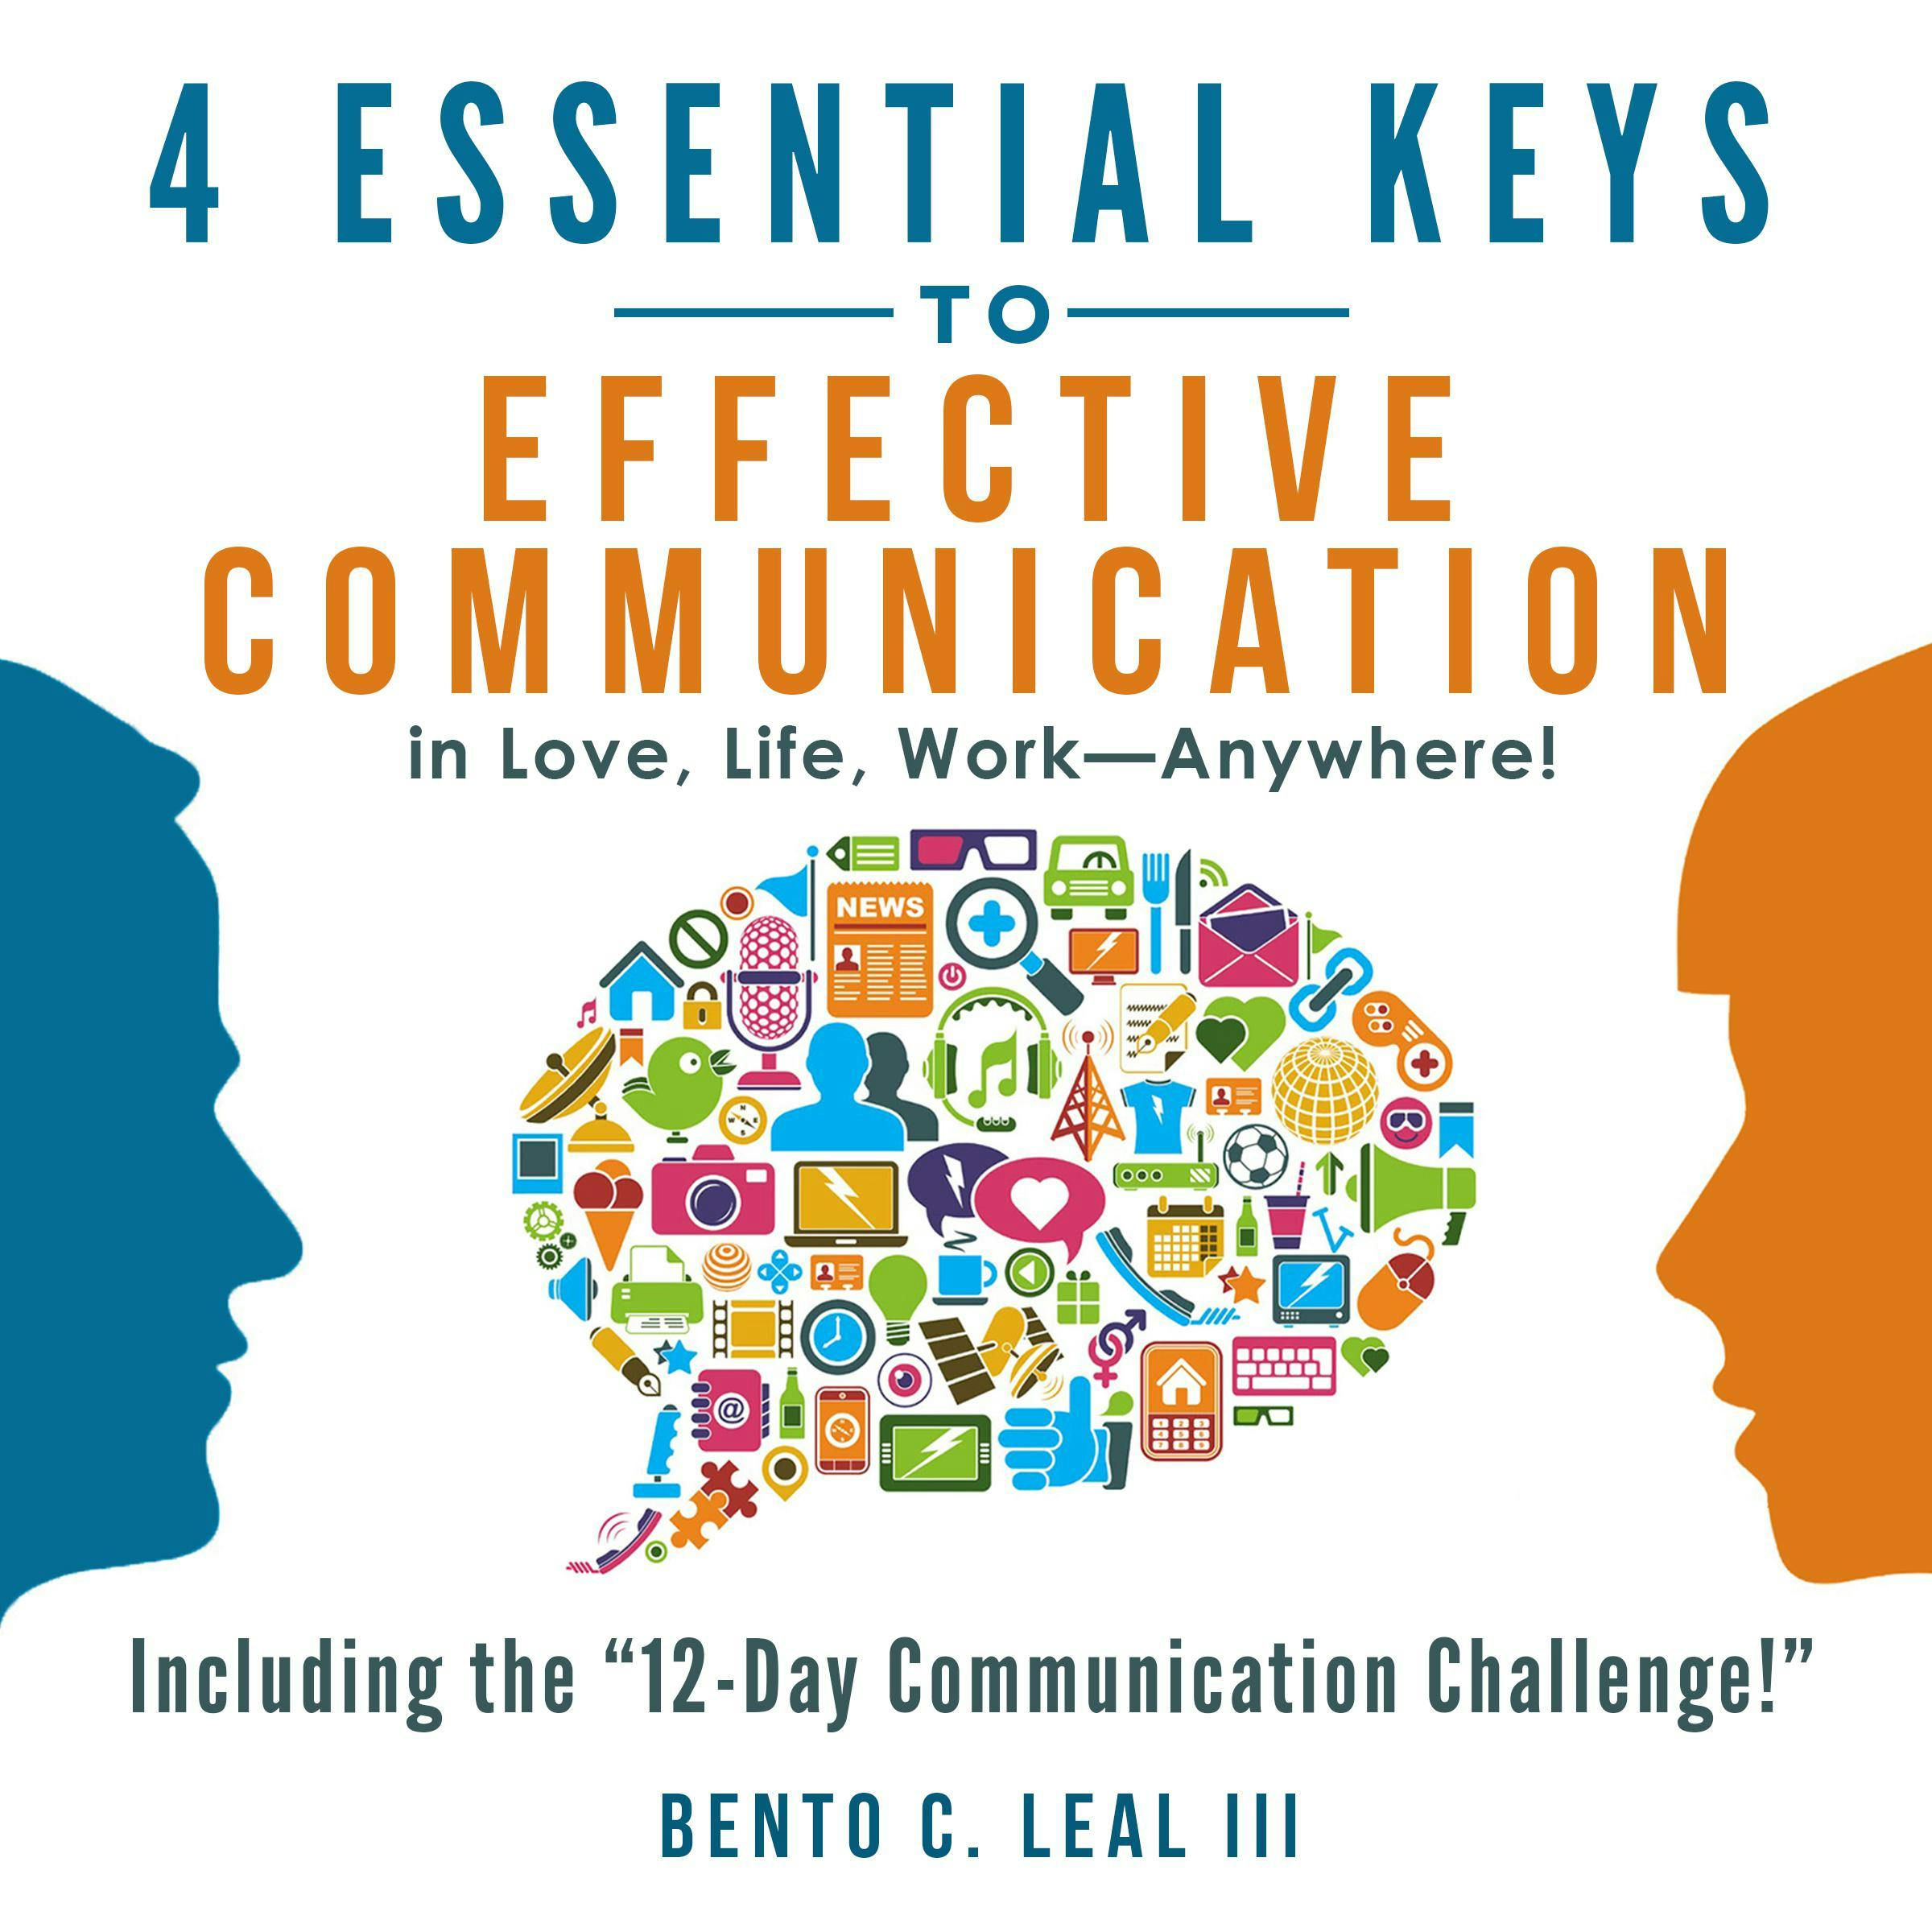 4 Essential Keys to Effective Communication in Love, Life, Work - Anywhere!: A How-To Guide for Practicing the Empathic Listening, Speaking, and Dialogue Skills to Achieve Relationship Success - undefined